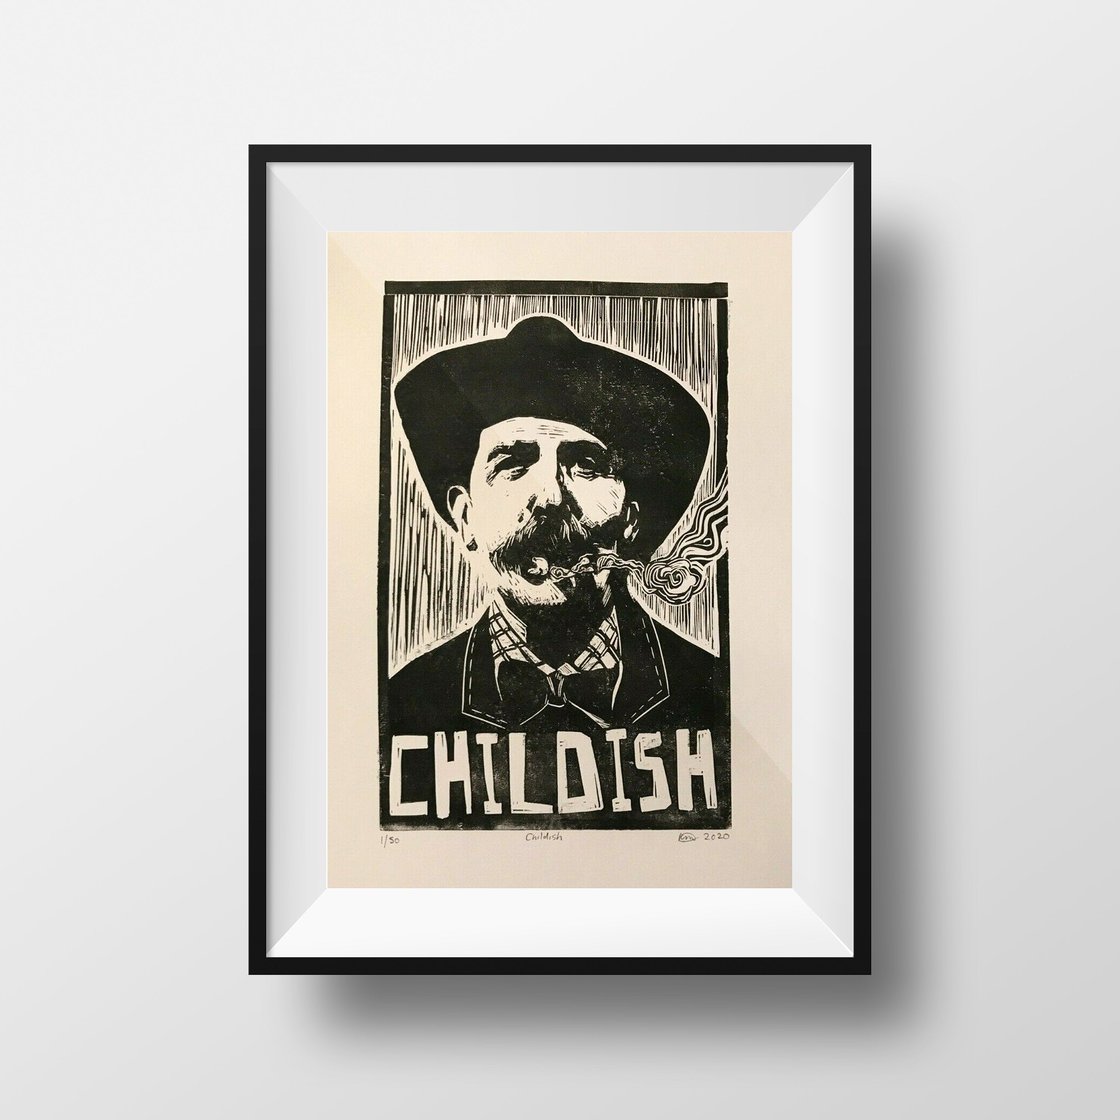 Image of Billy Childish. Hand Made. Original A4 linocut print. Limited and Signed. Art.